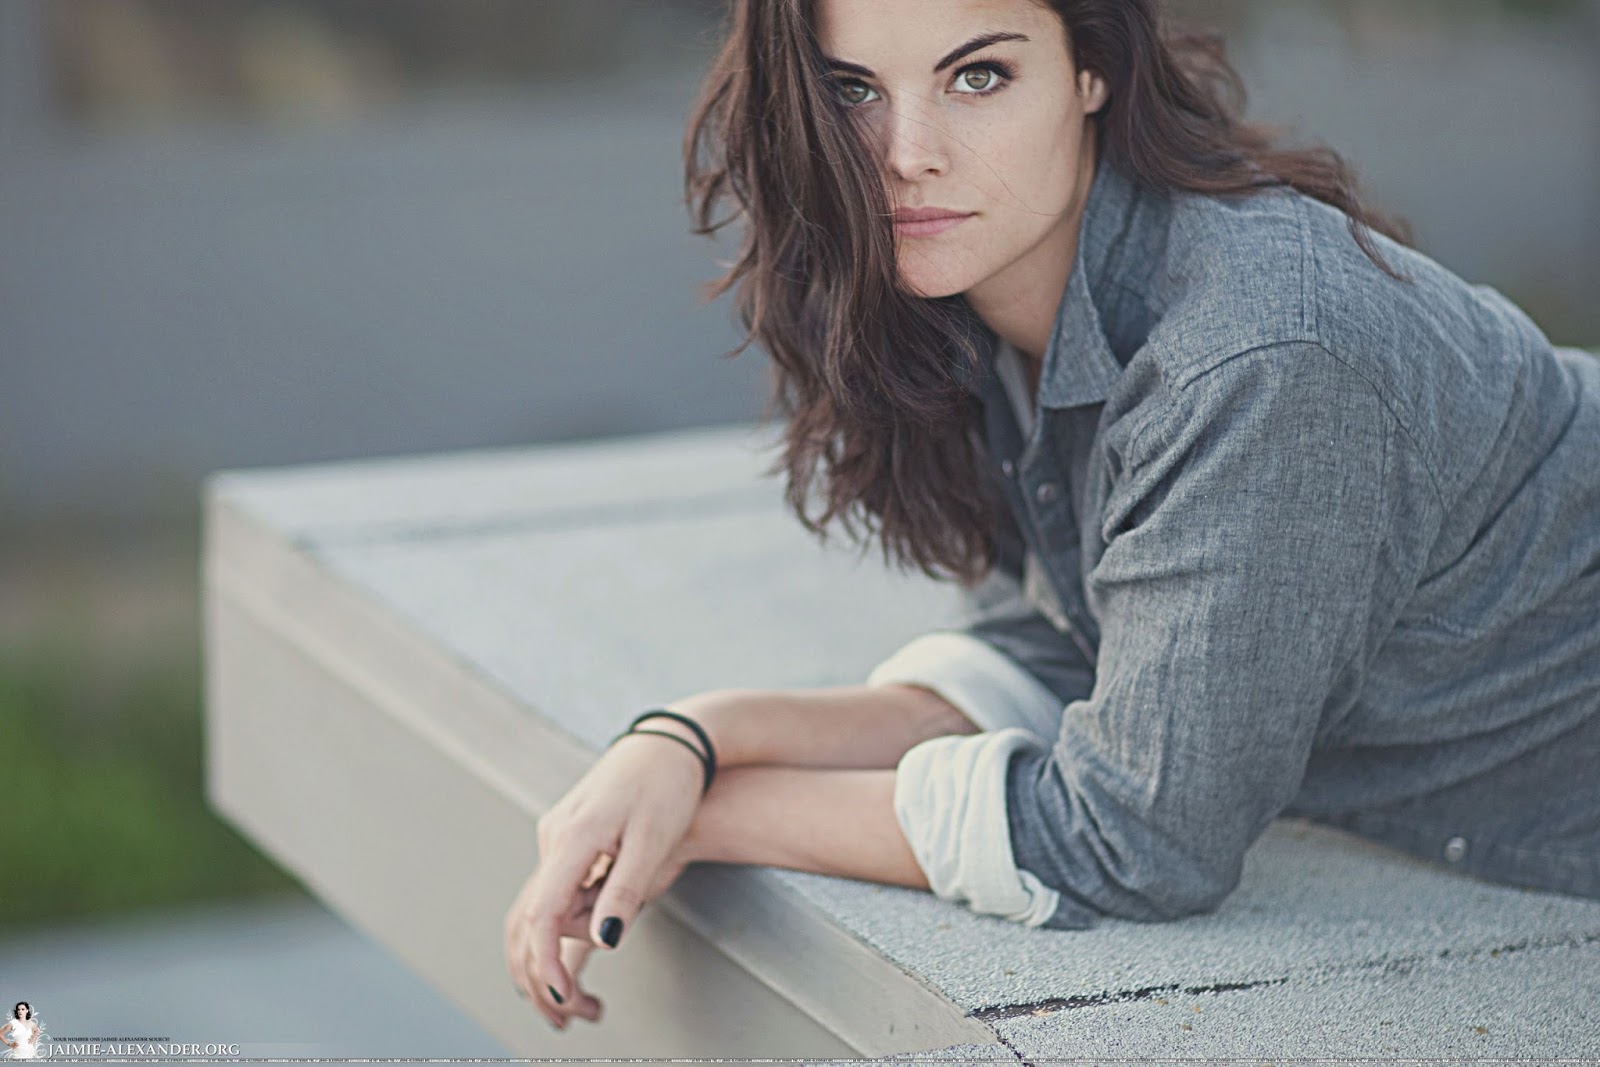 Download this Jaimie Alexander picture